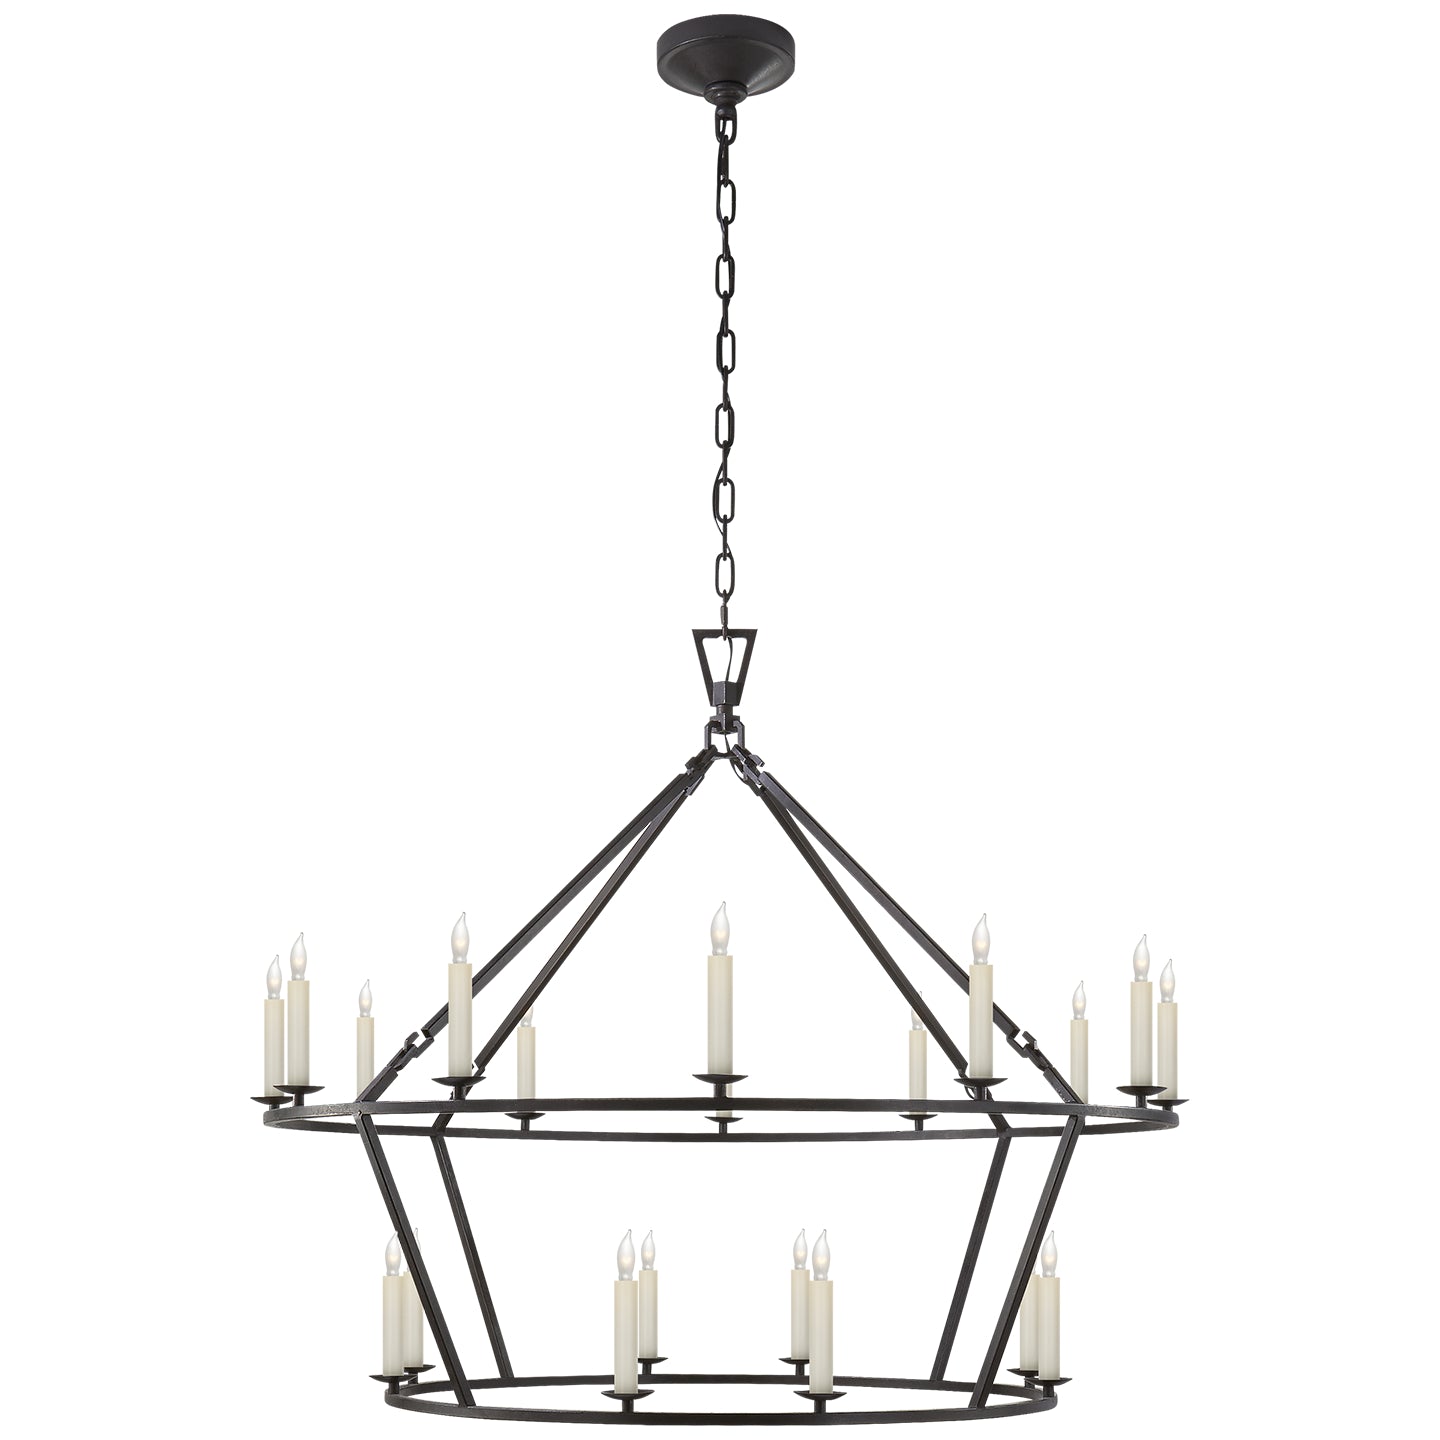 Load image into Gallery viewer, Visual Comfort Signature - CHC 5179AI - 20 Light Chandelier - Darlana Ring - Aged Iron
